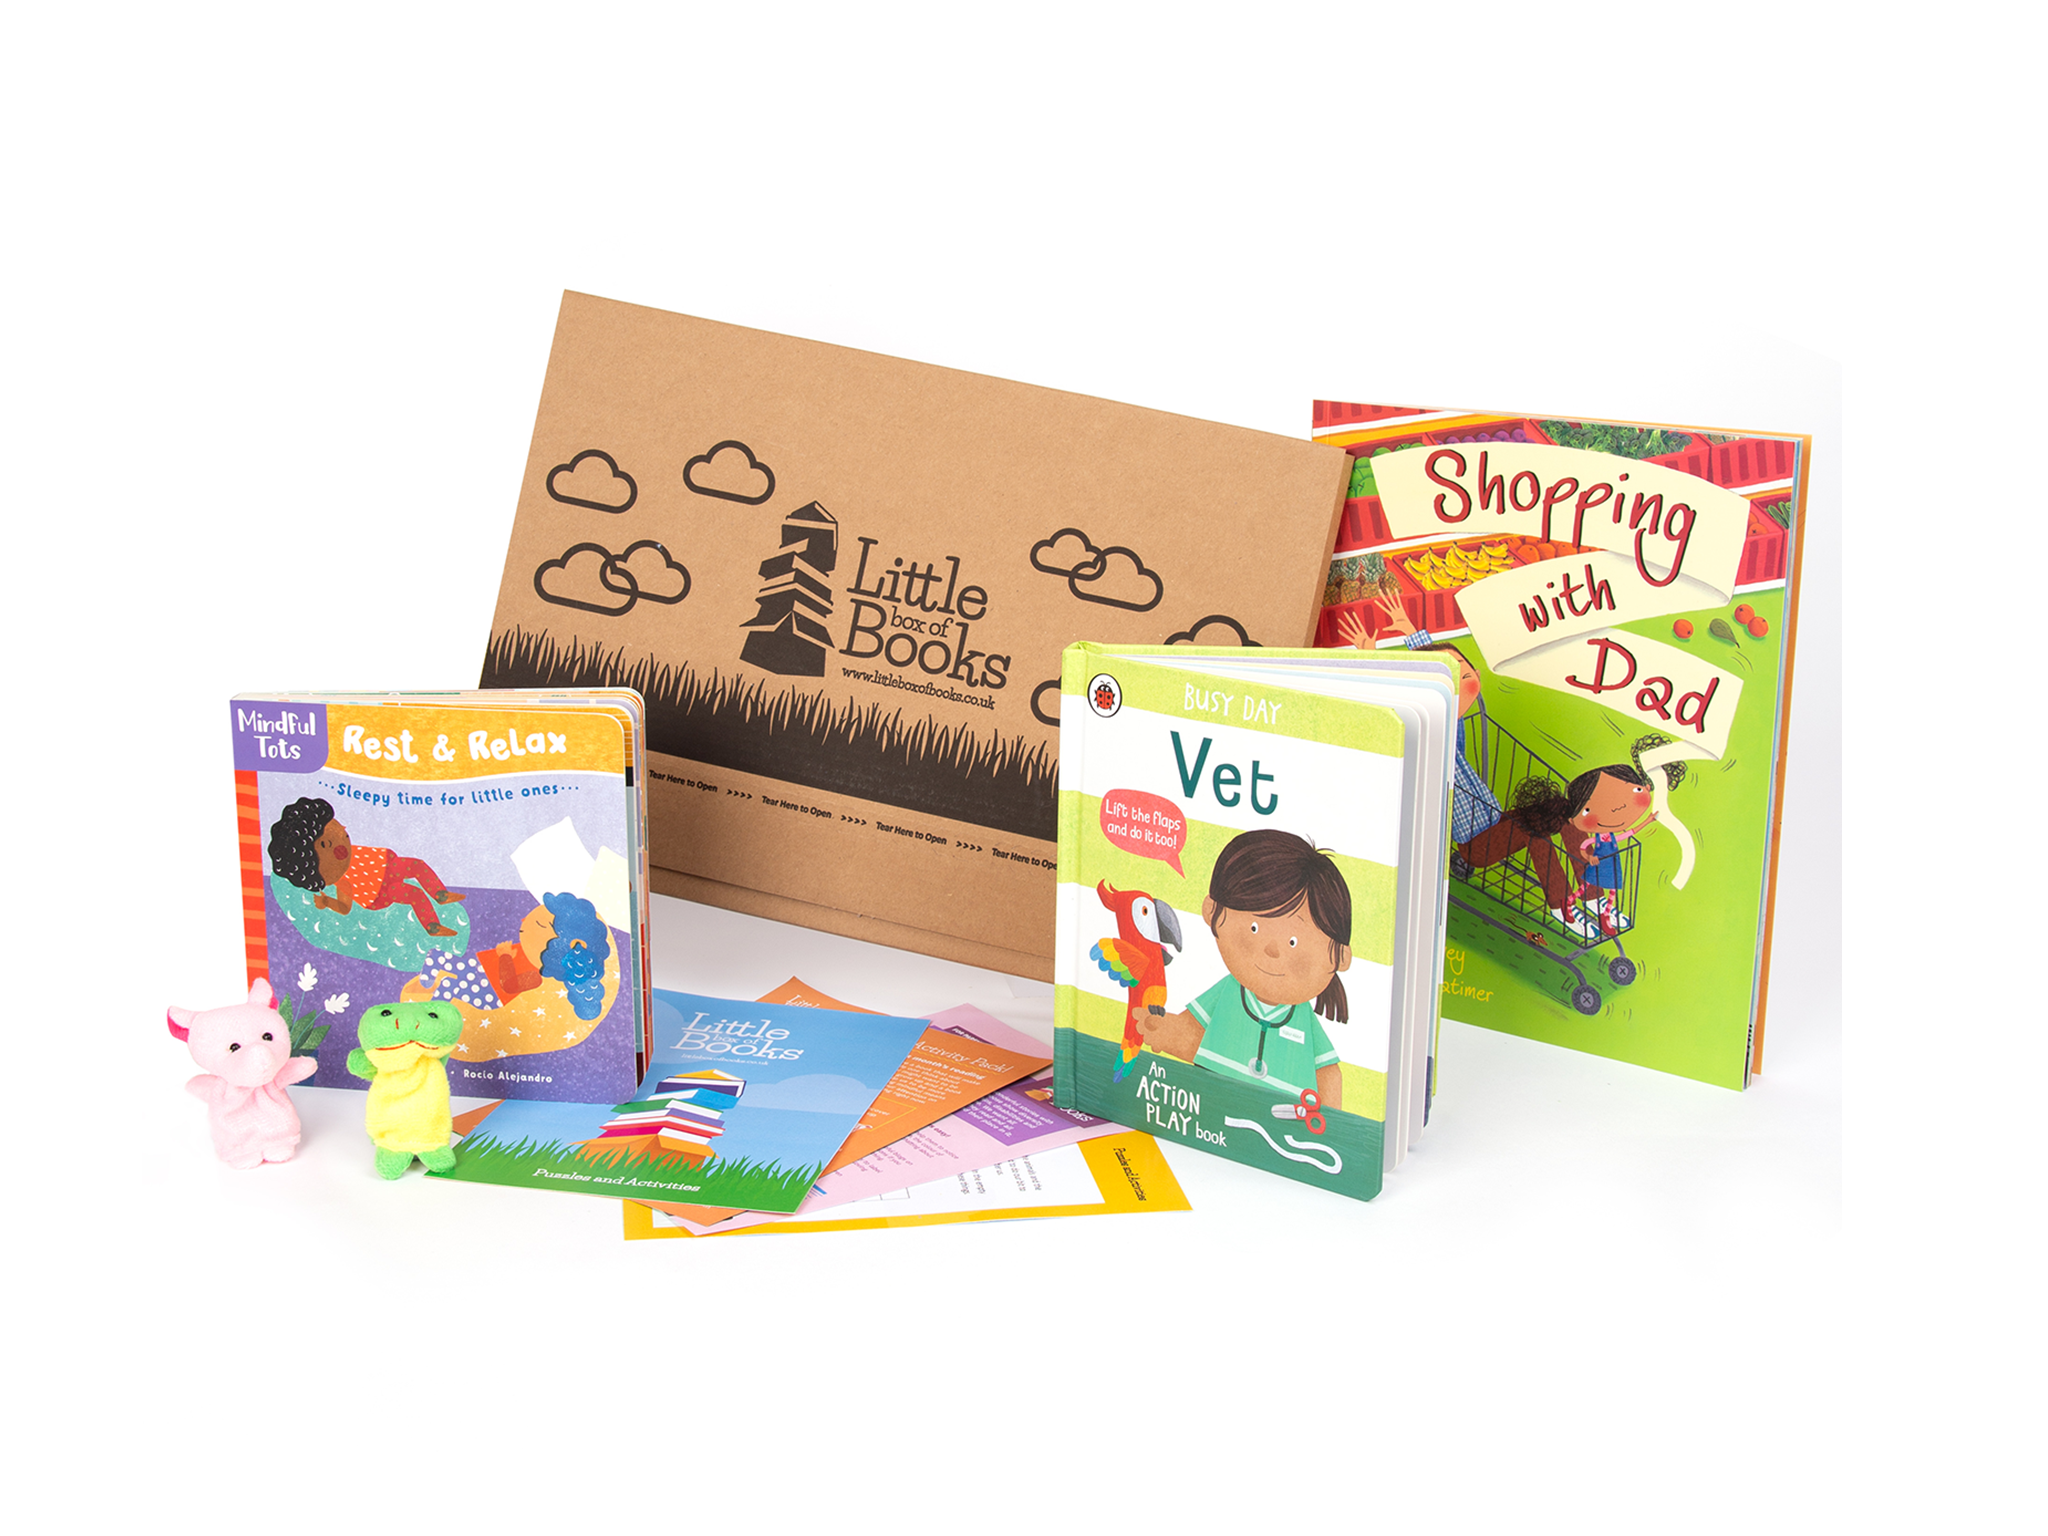 Best subscription boxes for kids 2022: From gardening to baking